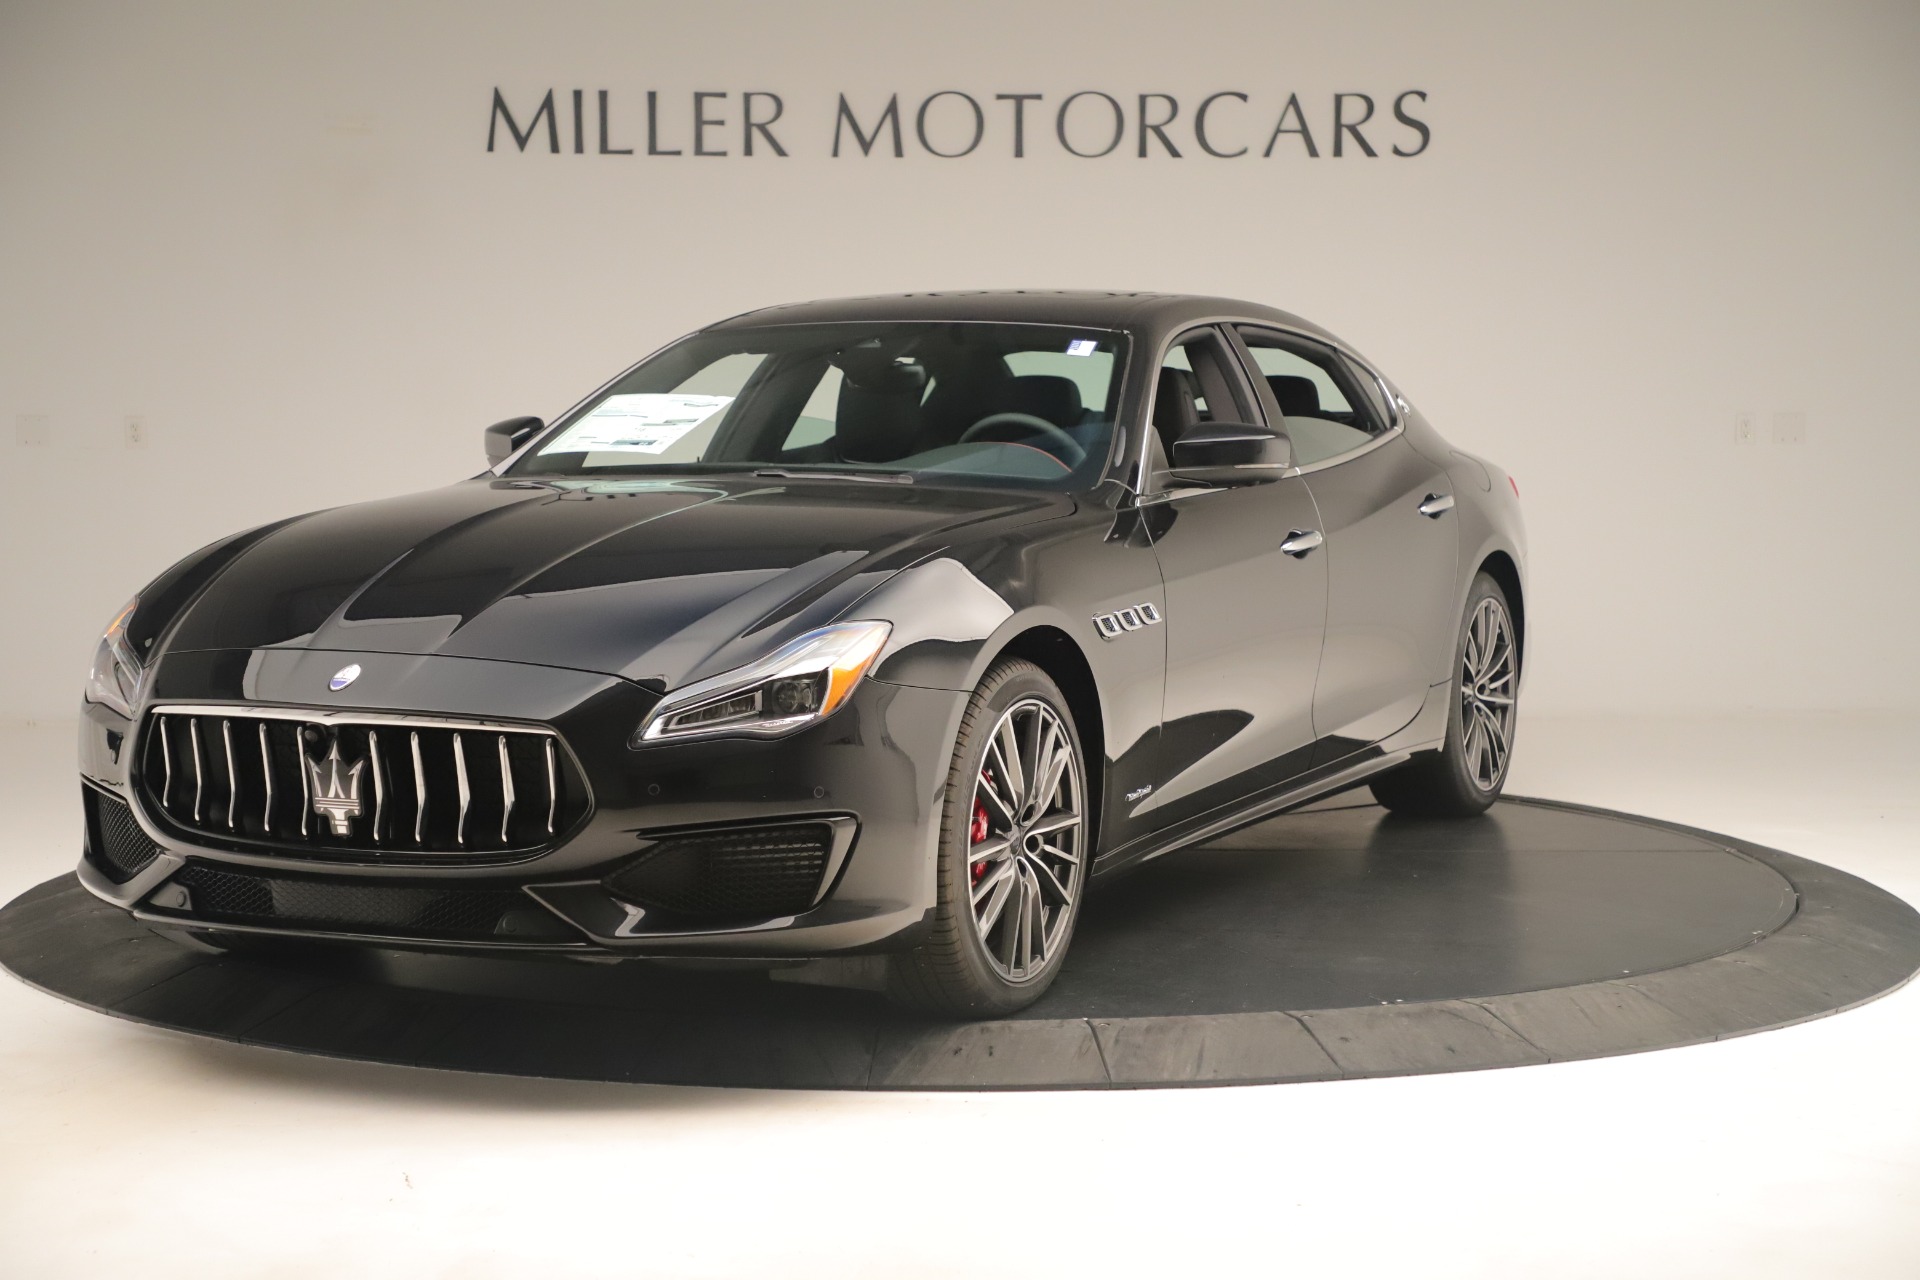 New 2019 Maserati Quattroporte S Q4 GranSport for sale Sold at Rolls-Royce Motor Cars Greenwich in Greenwich CT 06830 1